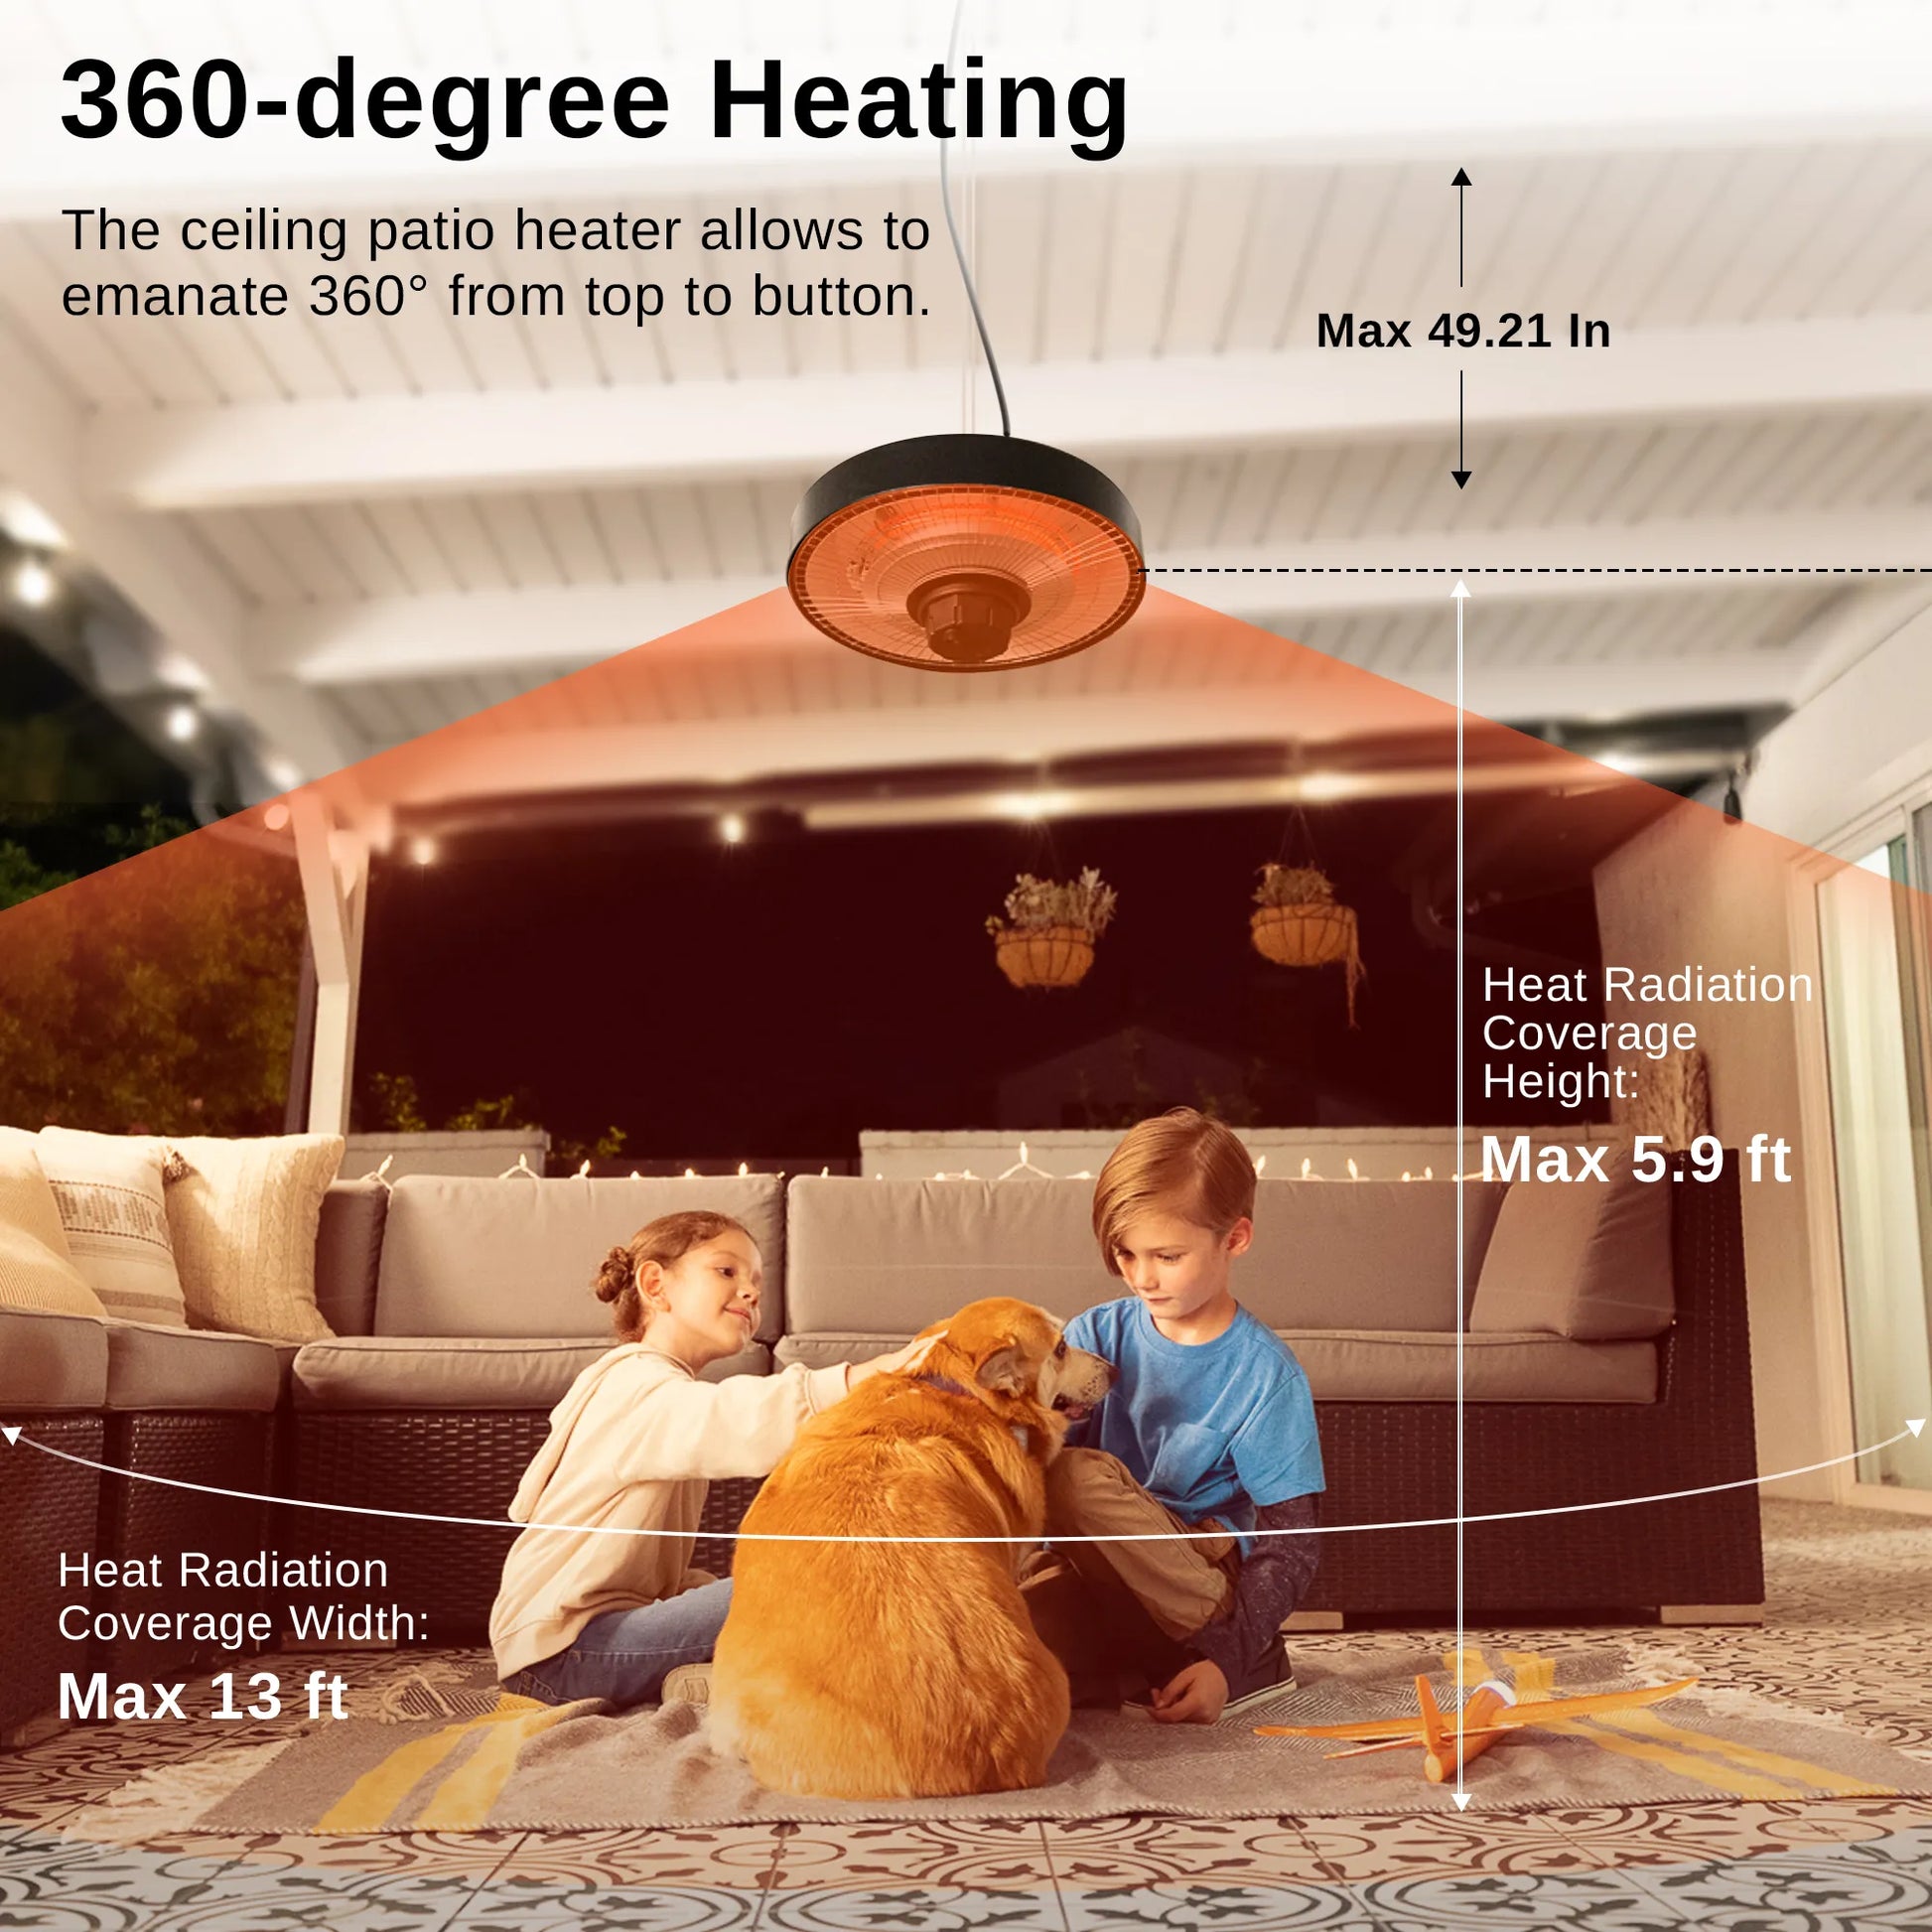 Ceiling-Outdoor-Patio-Electric-Heater-360-Degree-Heat